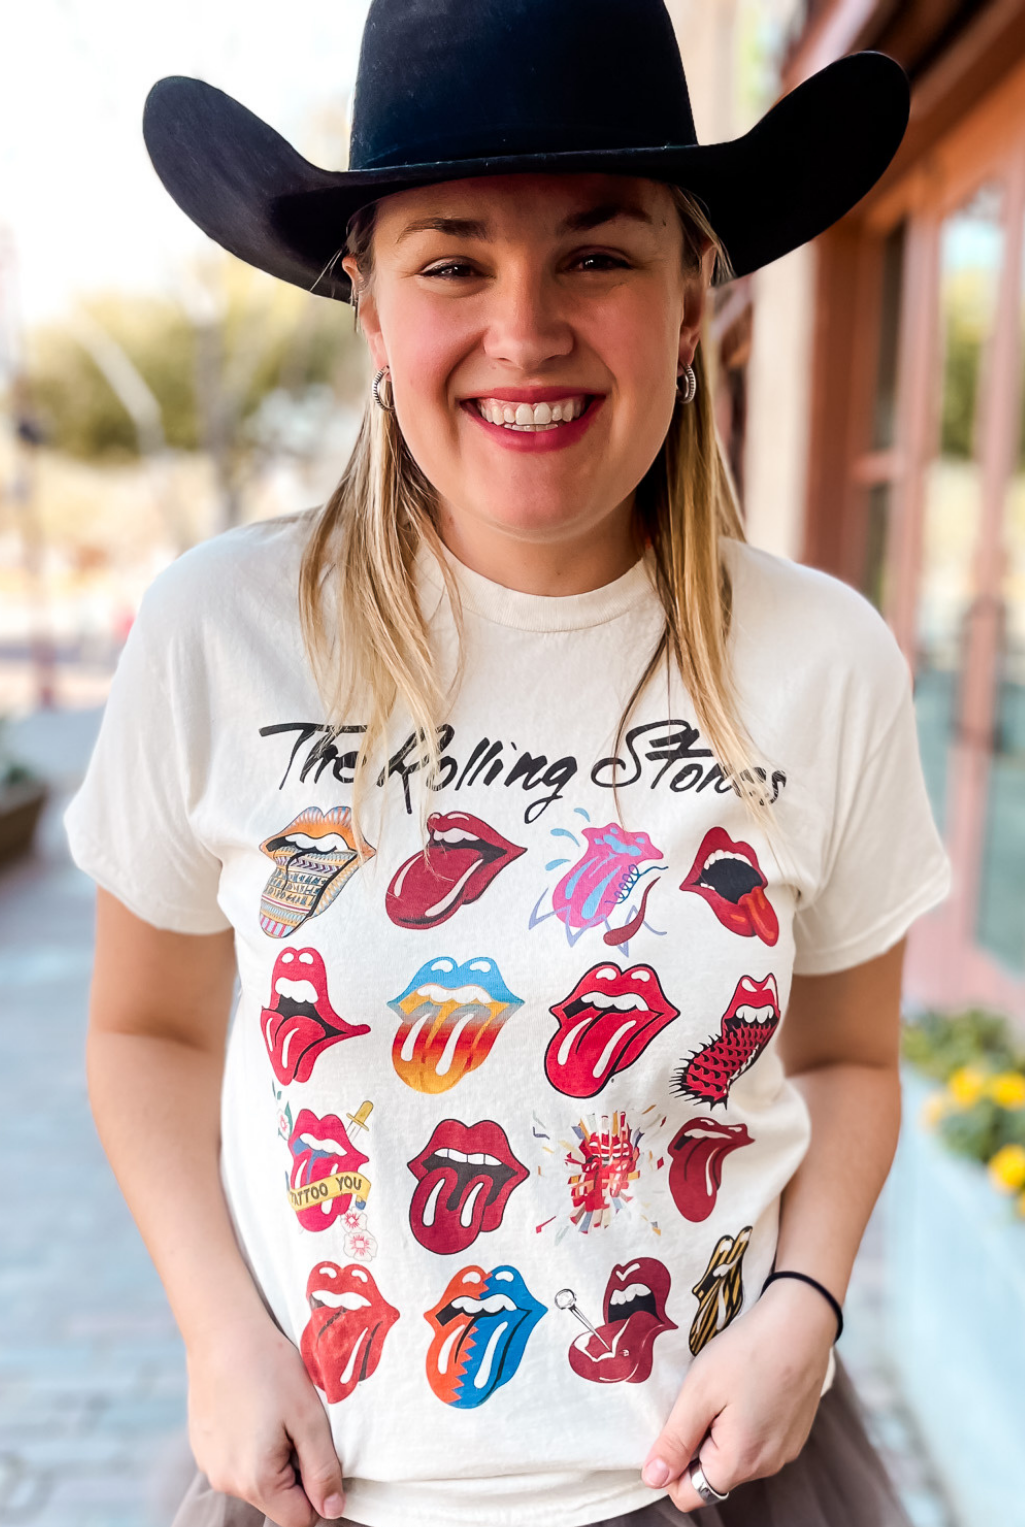 Stones Licks Over Time T-Shirt